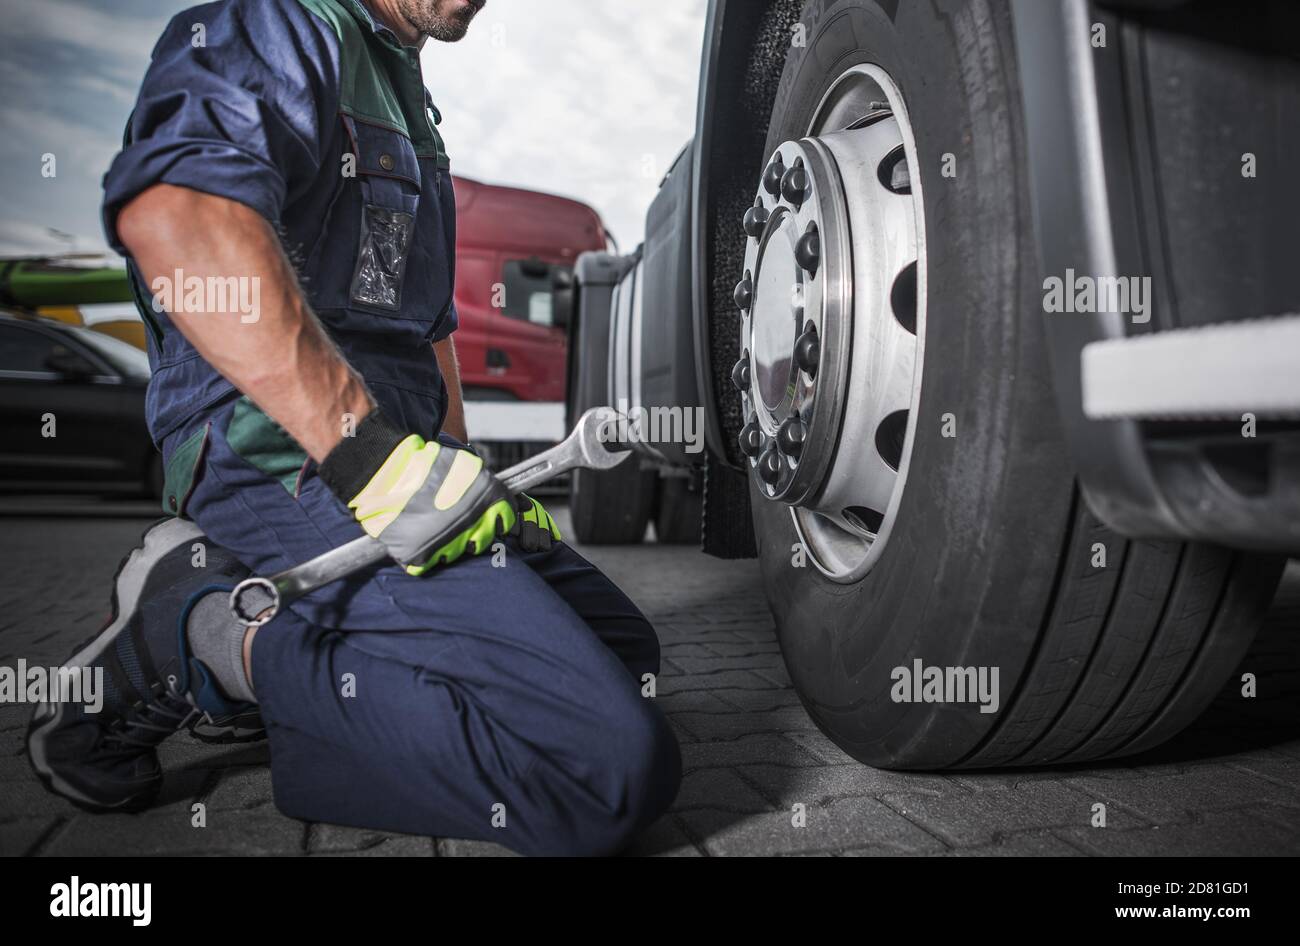 Caucasian Truck Mechanic with Large Wrench in His Hand Perform Scheduled Vehicle Maintenance. Looking on the Semi Truck Wheel and Tire. Stock Photo